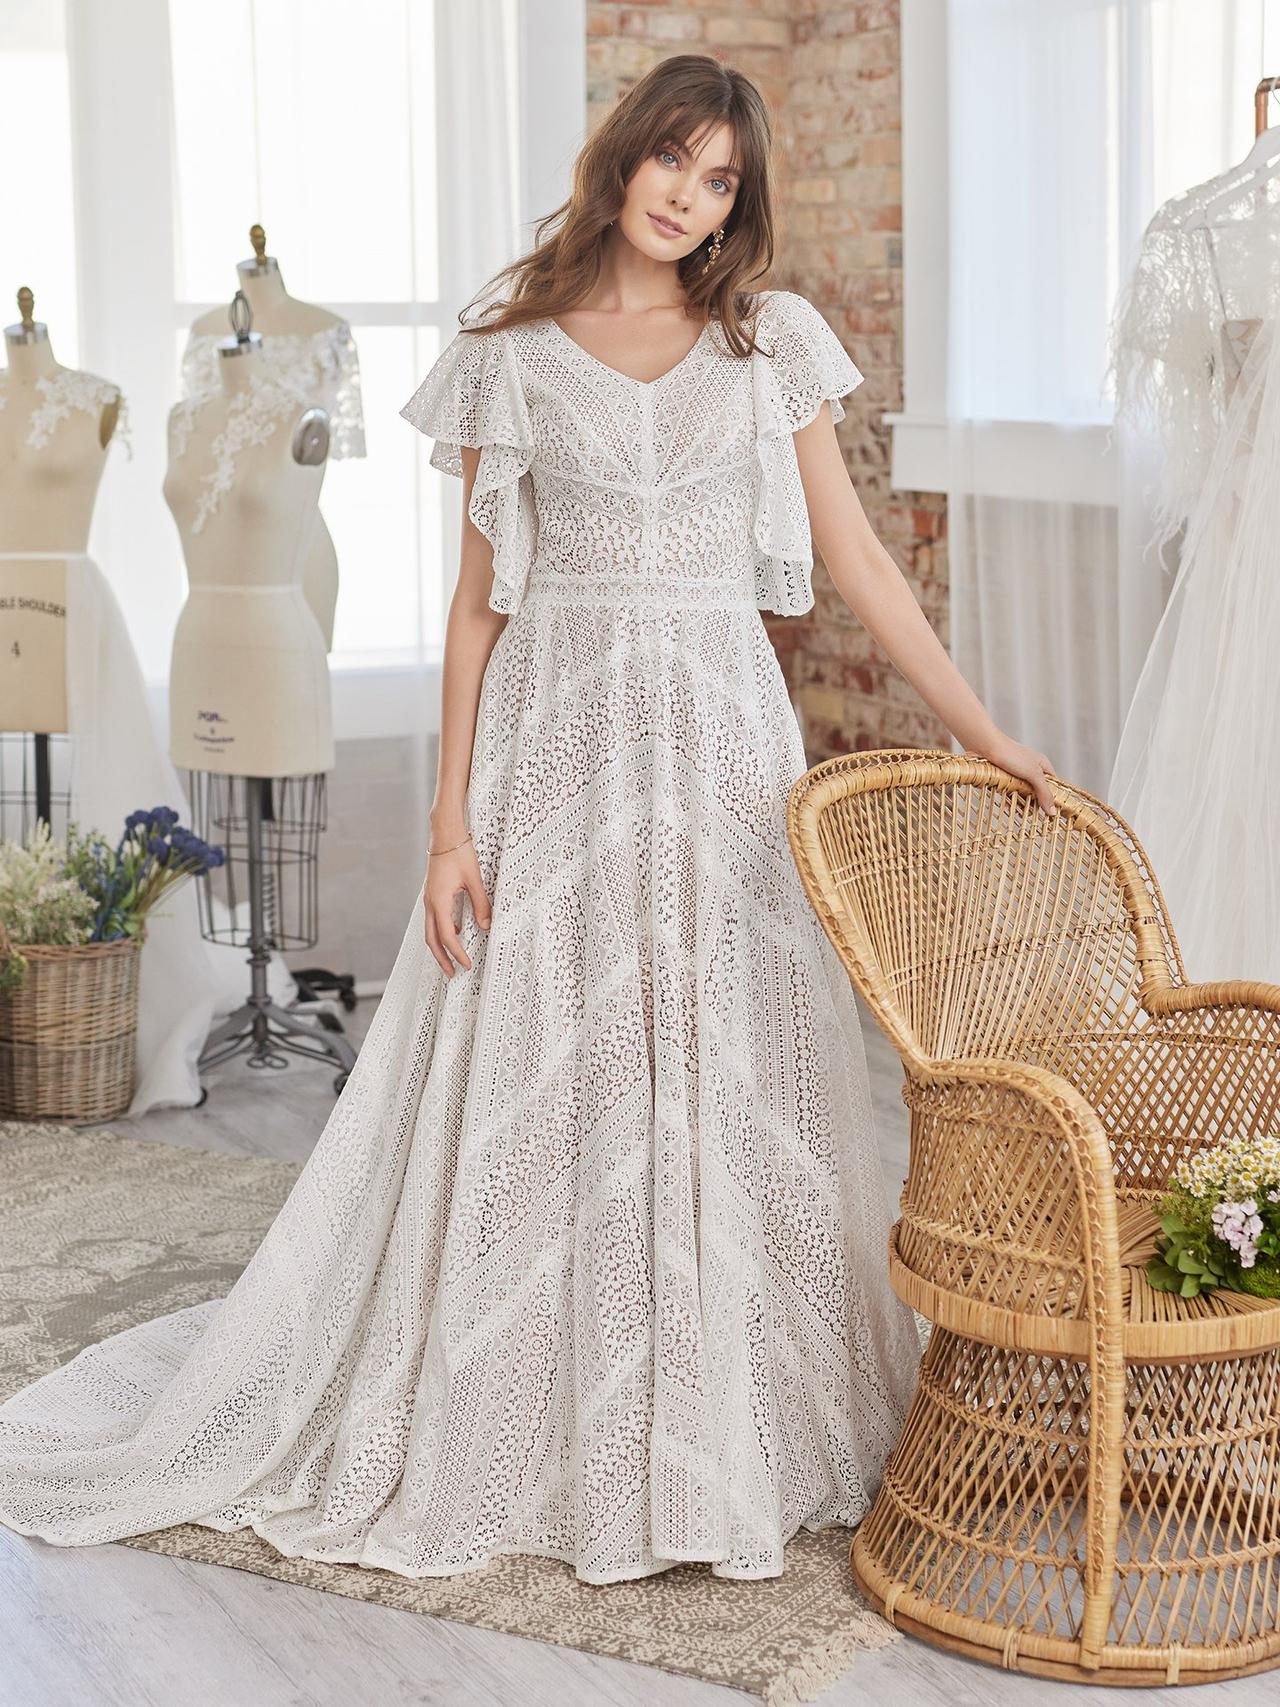 25 of the Best Casual Wedding Dresses 